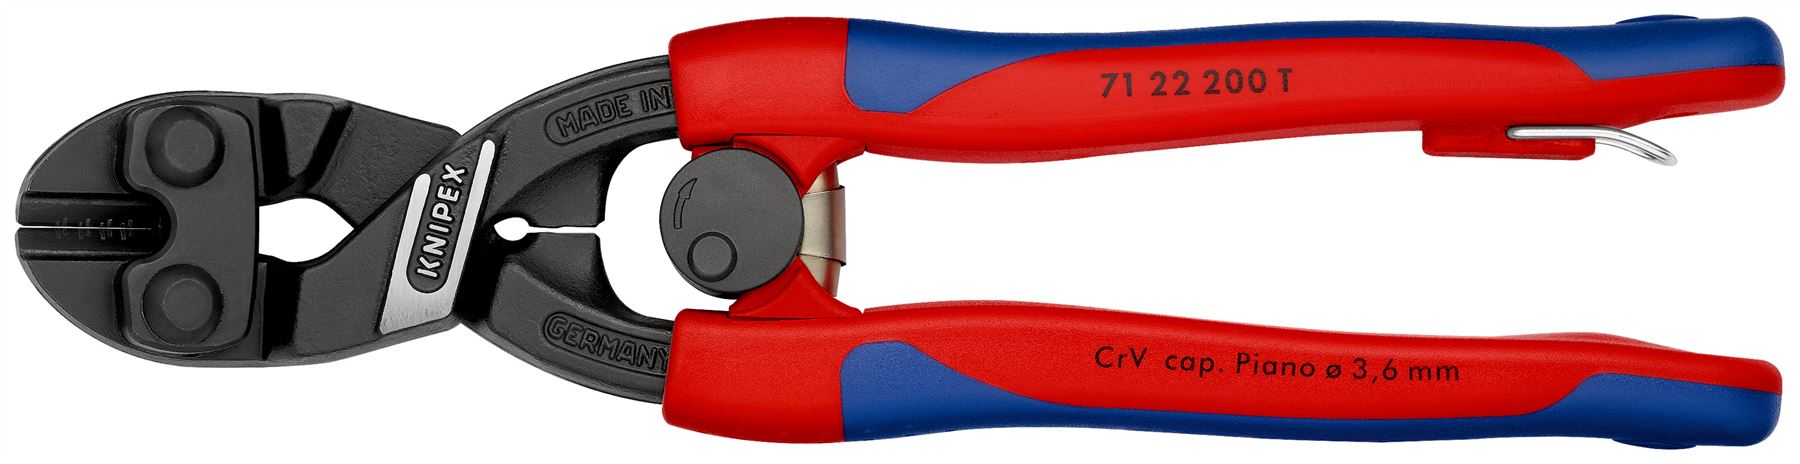 Knipex CoBolt Compact Bolt Cutter 20° Angled Head 200mm Multi Component Grips Tether Point 71 22 200 T